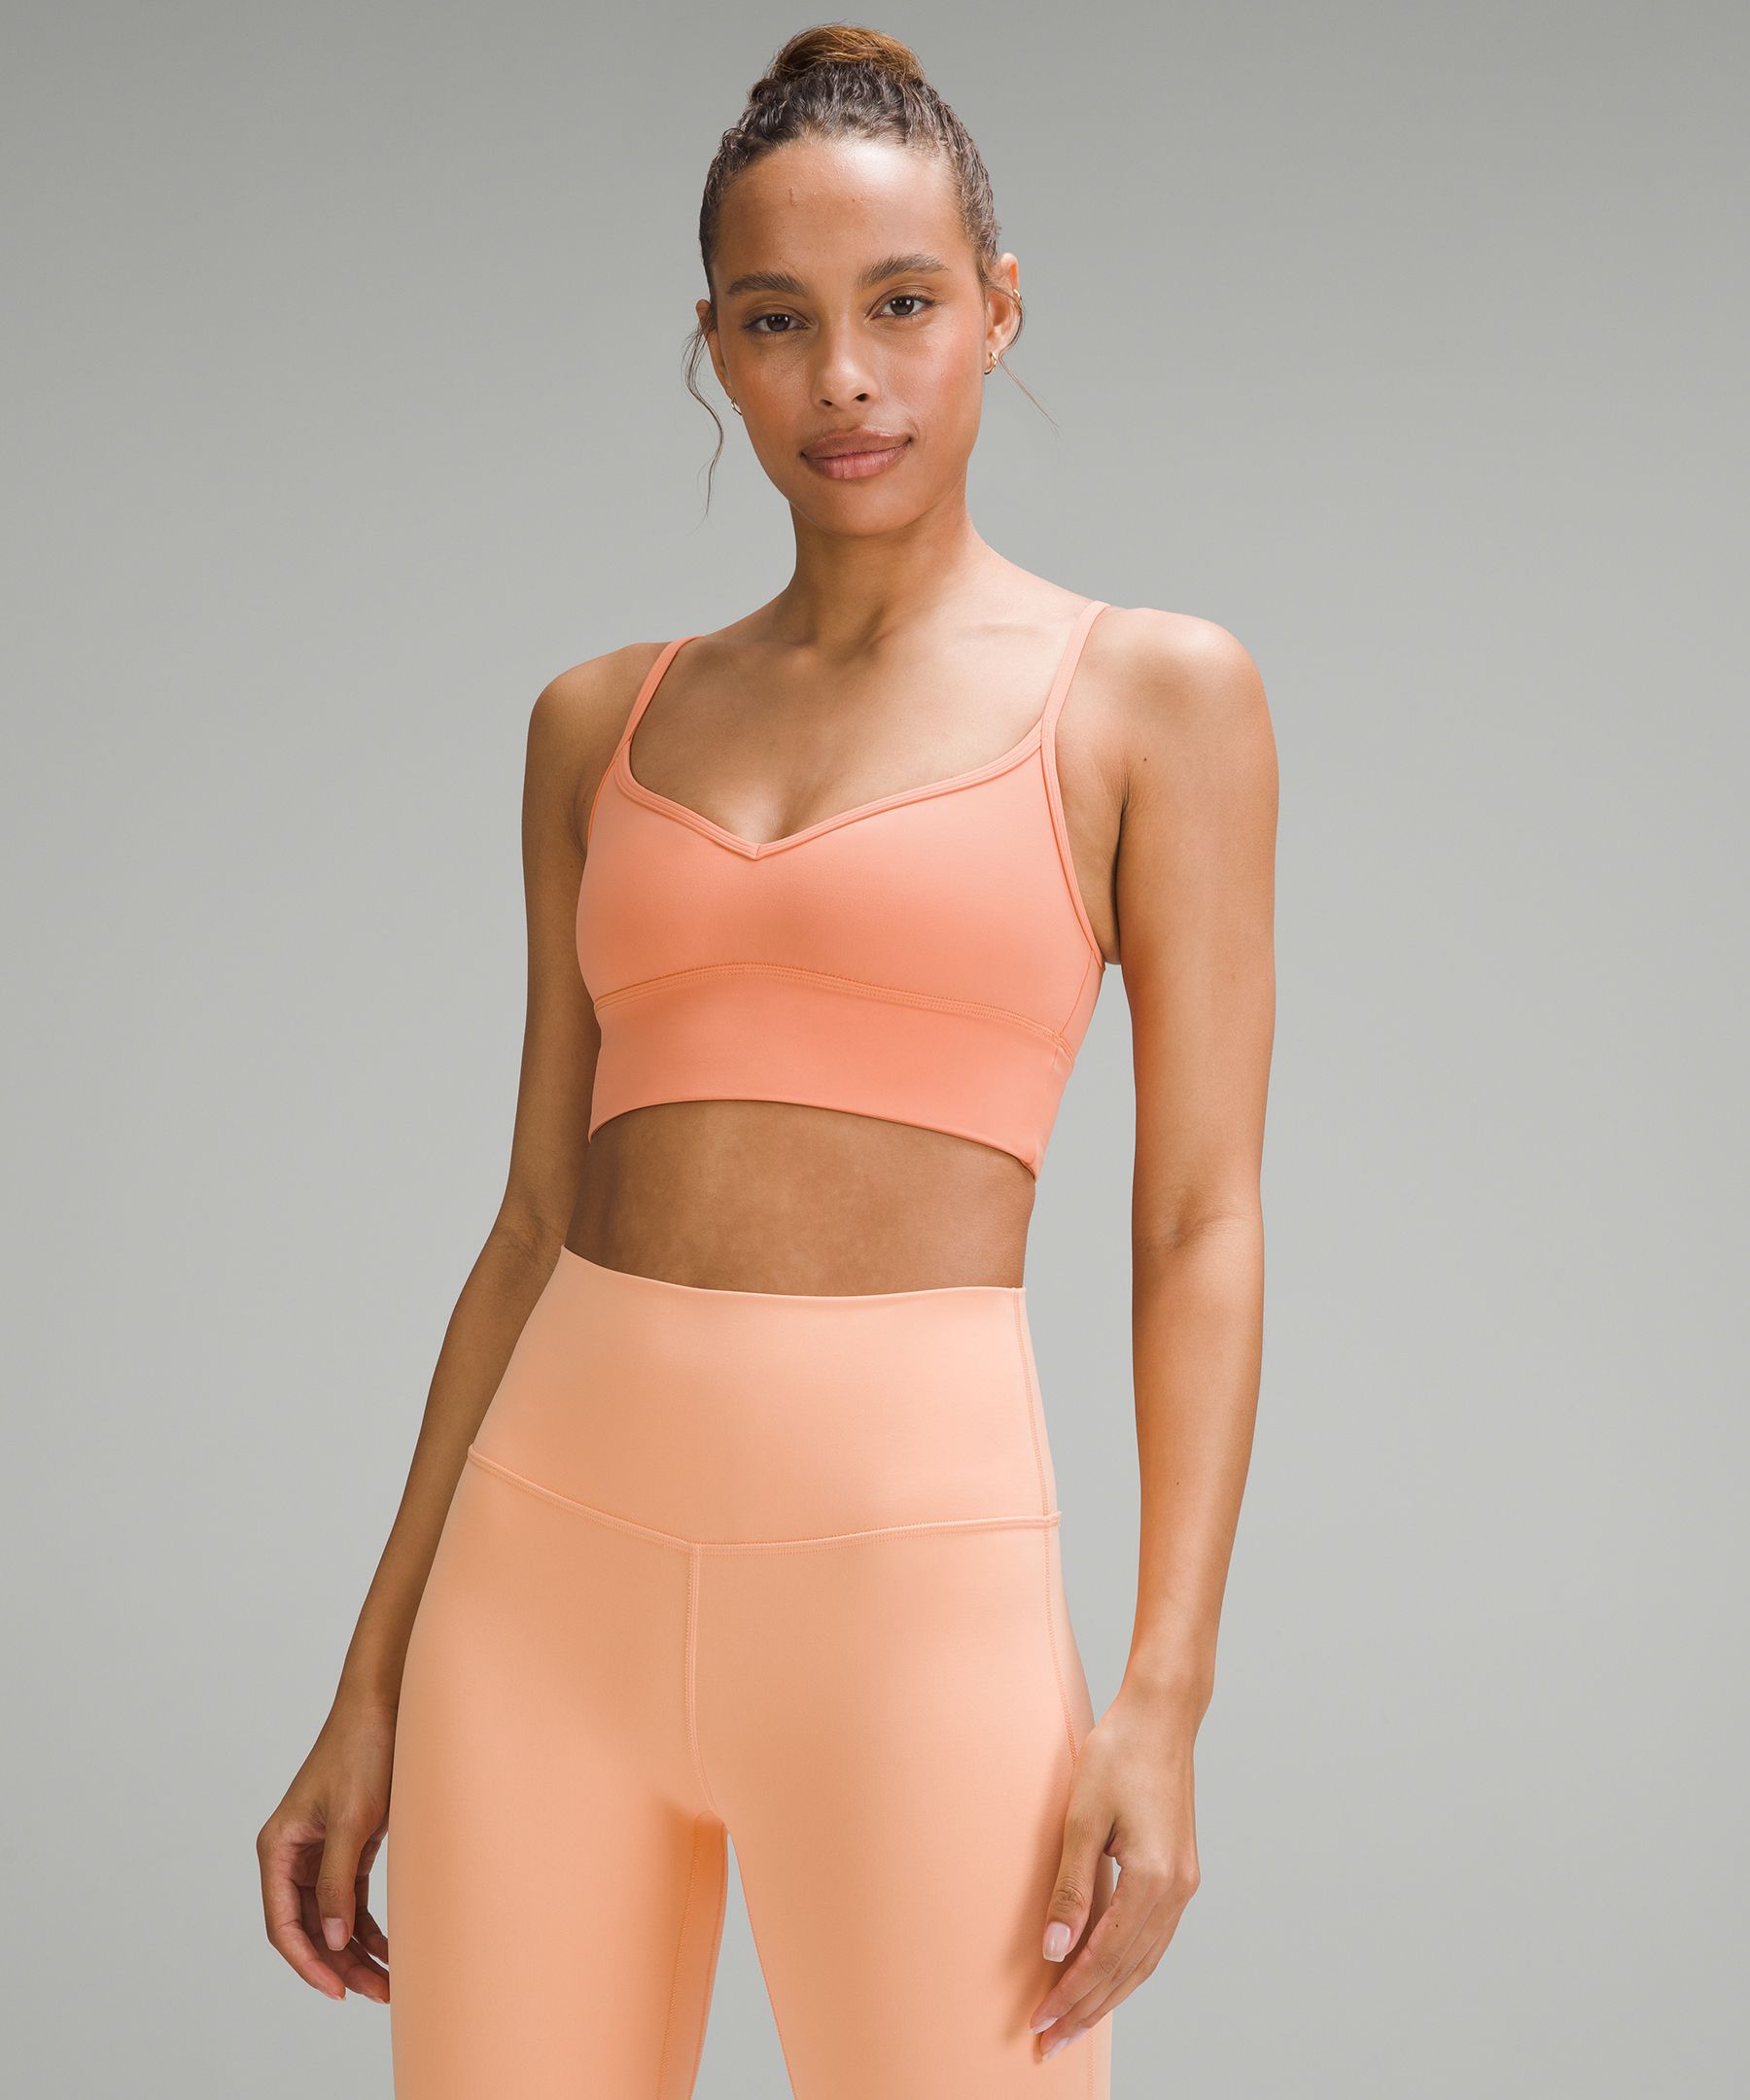 Lu Yoga Studio Pants For Women Quickly Dry, Ll Bean Drawstring Bag, Loose  Fit, Ideal For Yoga, Running, Gym, Fitness, Jogging And Sports From  Hexiang2, $34.96